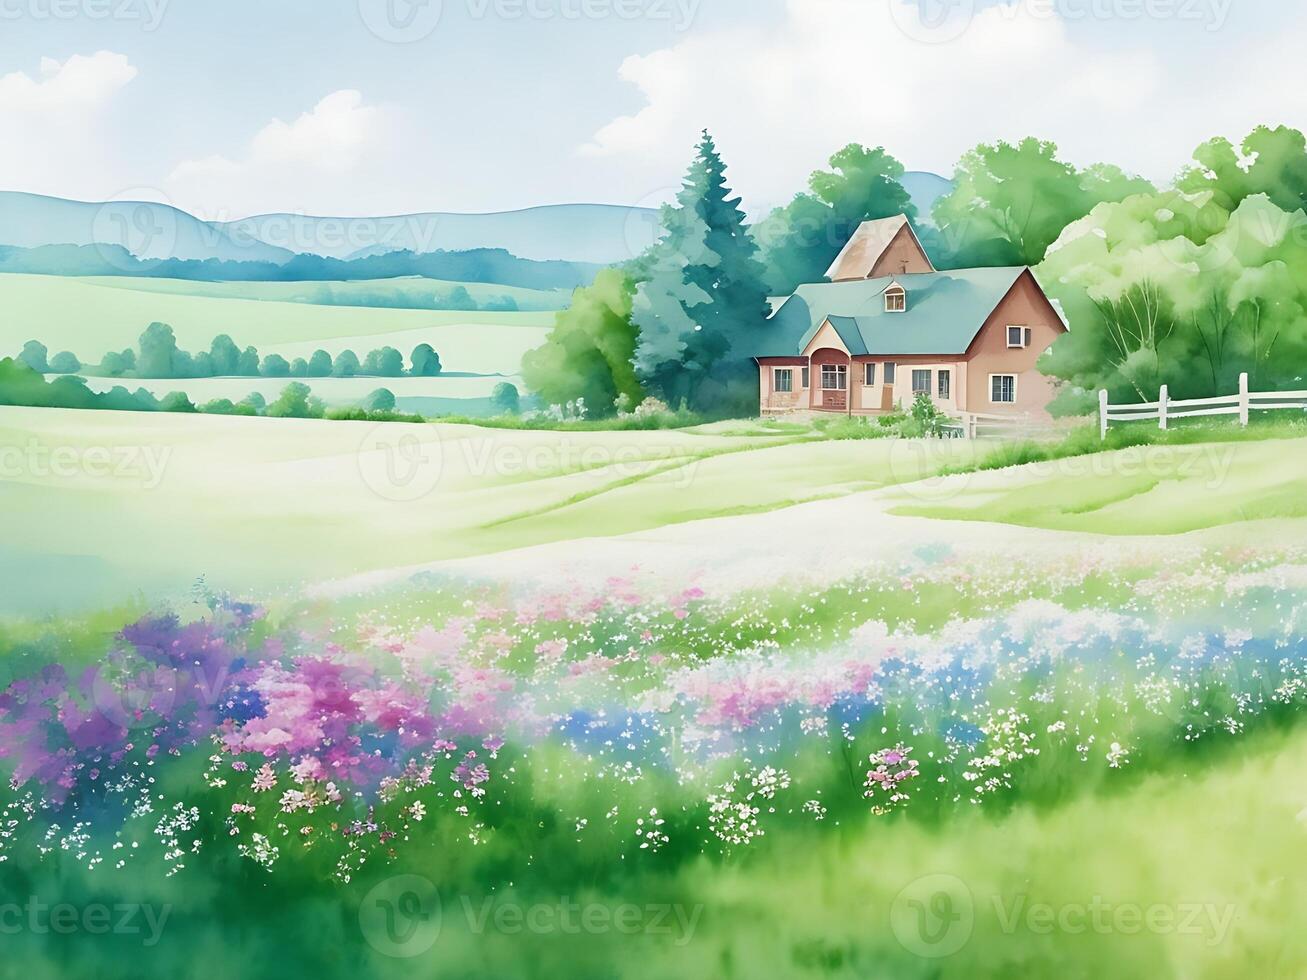 A watercolor painting of a rural countryside scene, photo